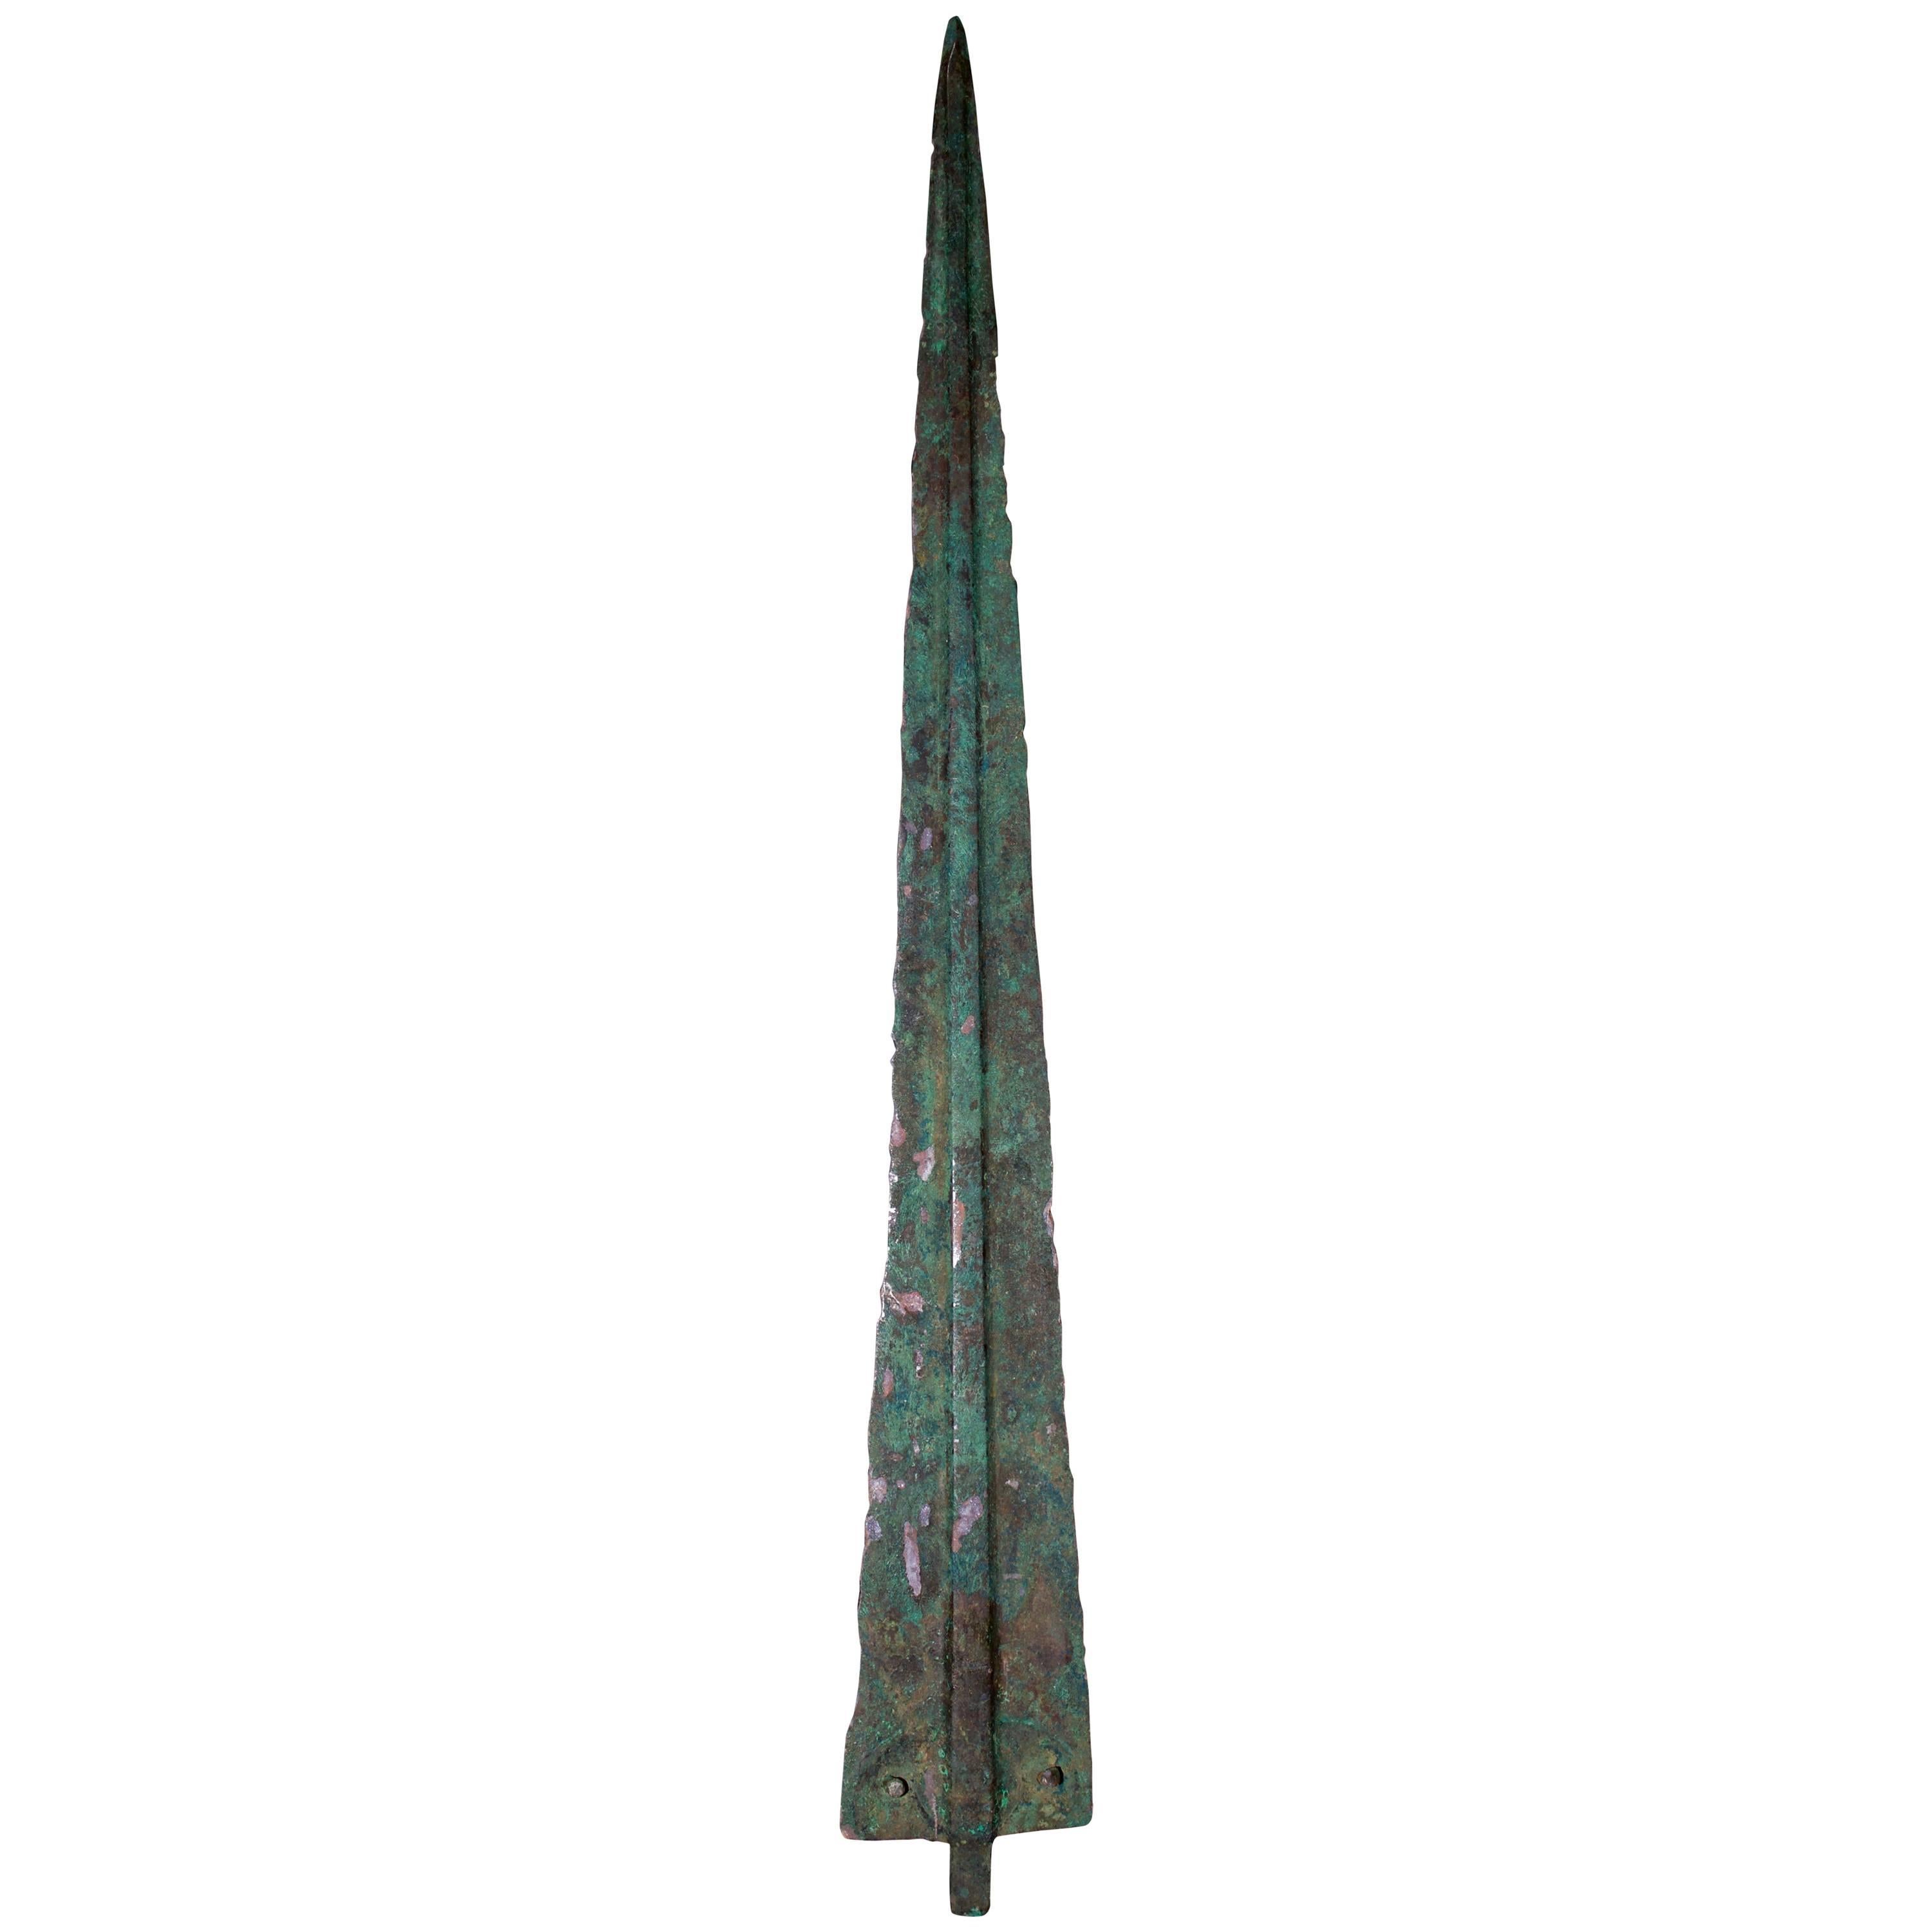 Luristan Bronze Spear Head // Early Iron Age Weapon